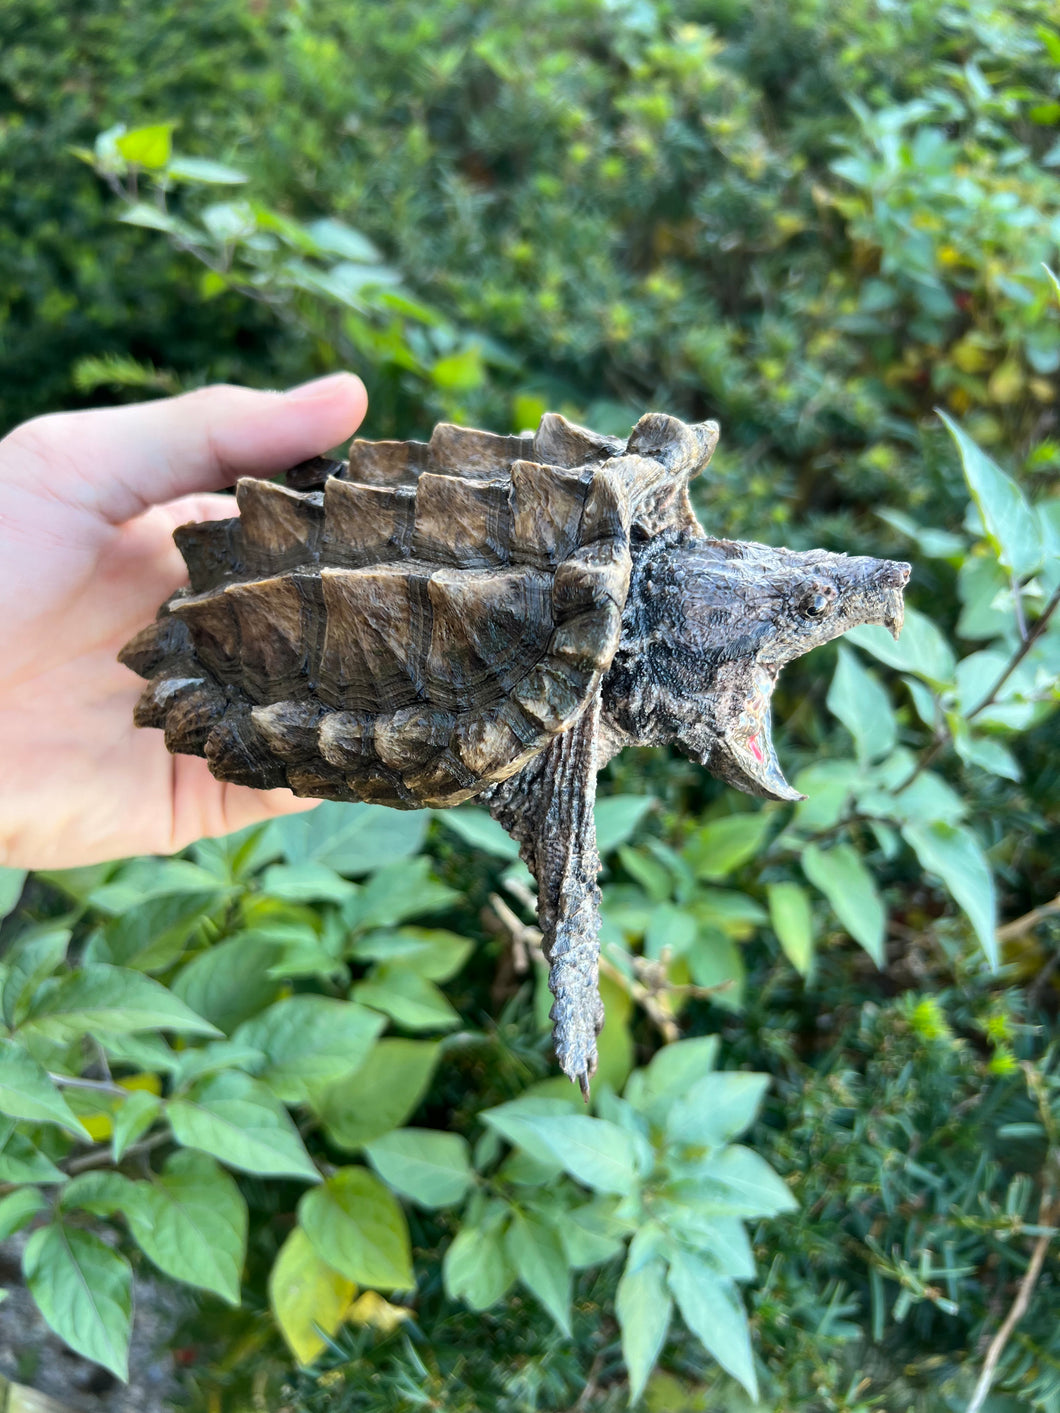 Small Alligator Snapping Turtle